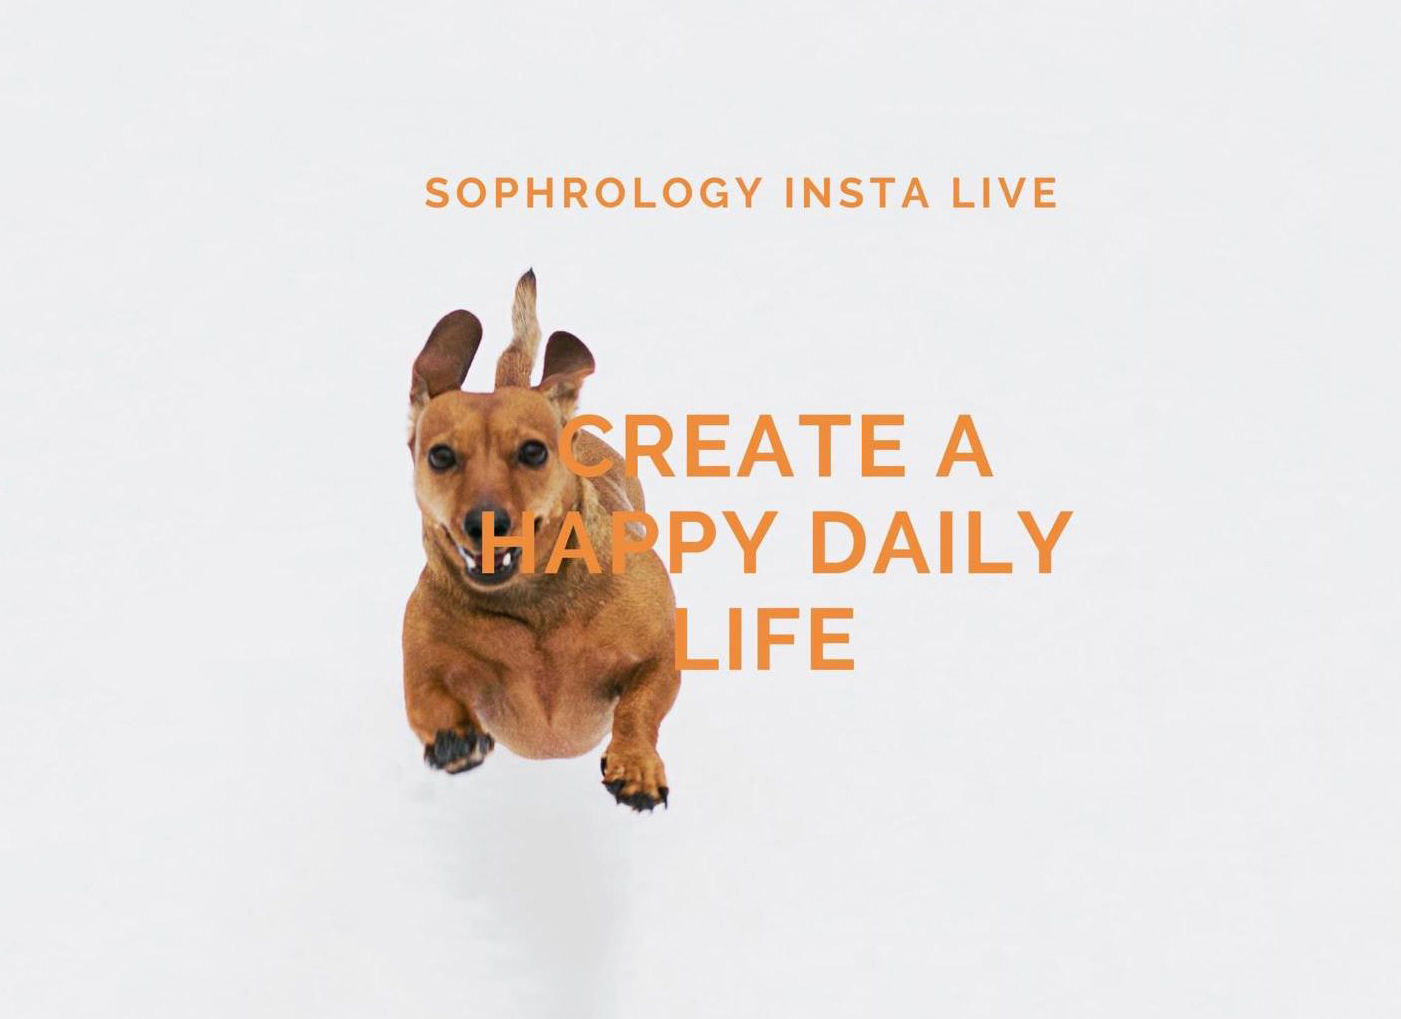 InstaLive Sophrology Session: Create a Happy Daily Life